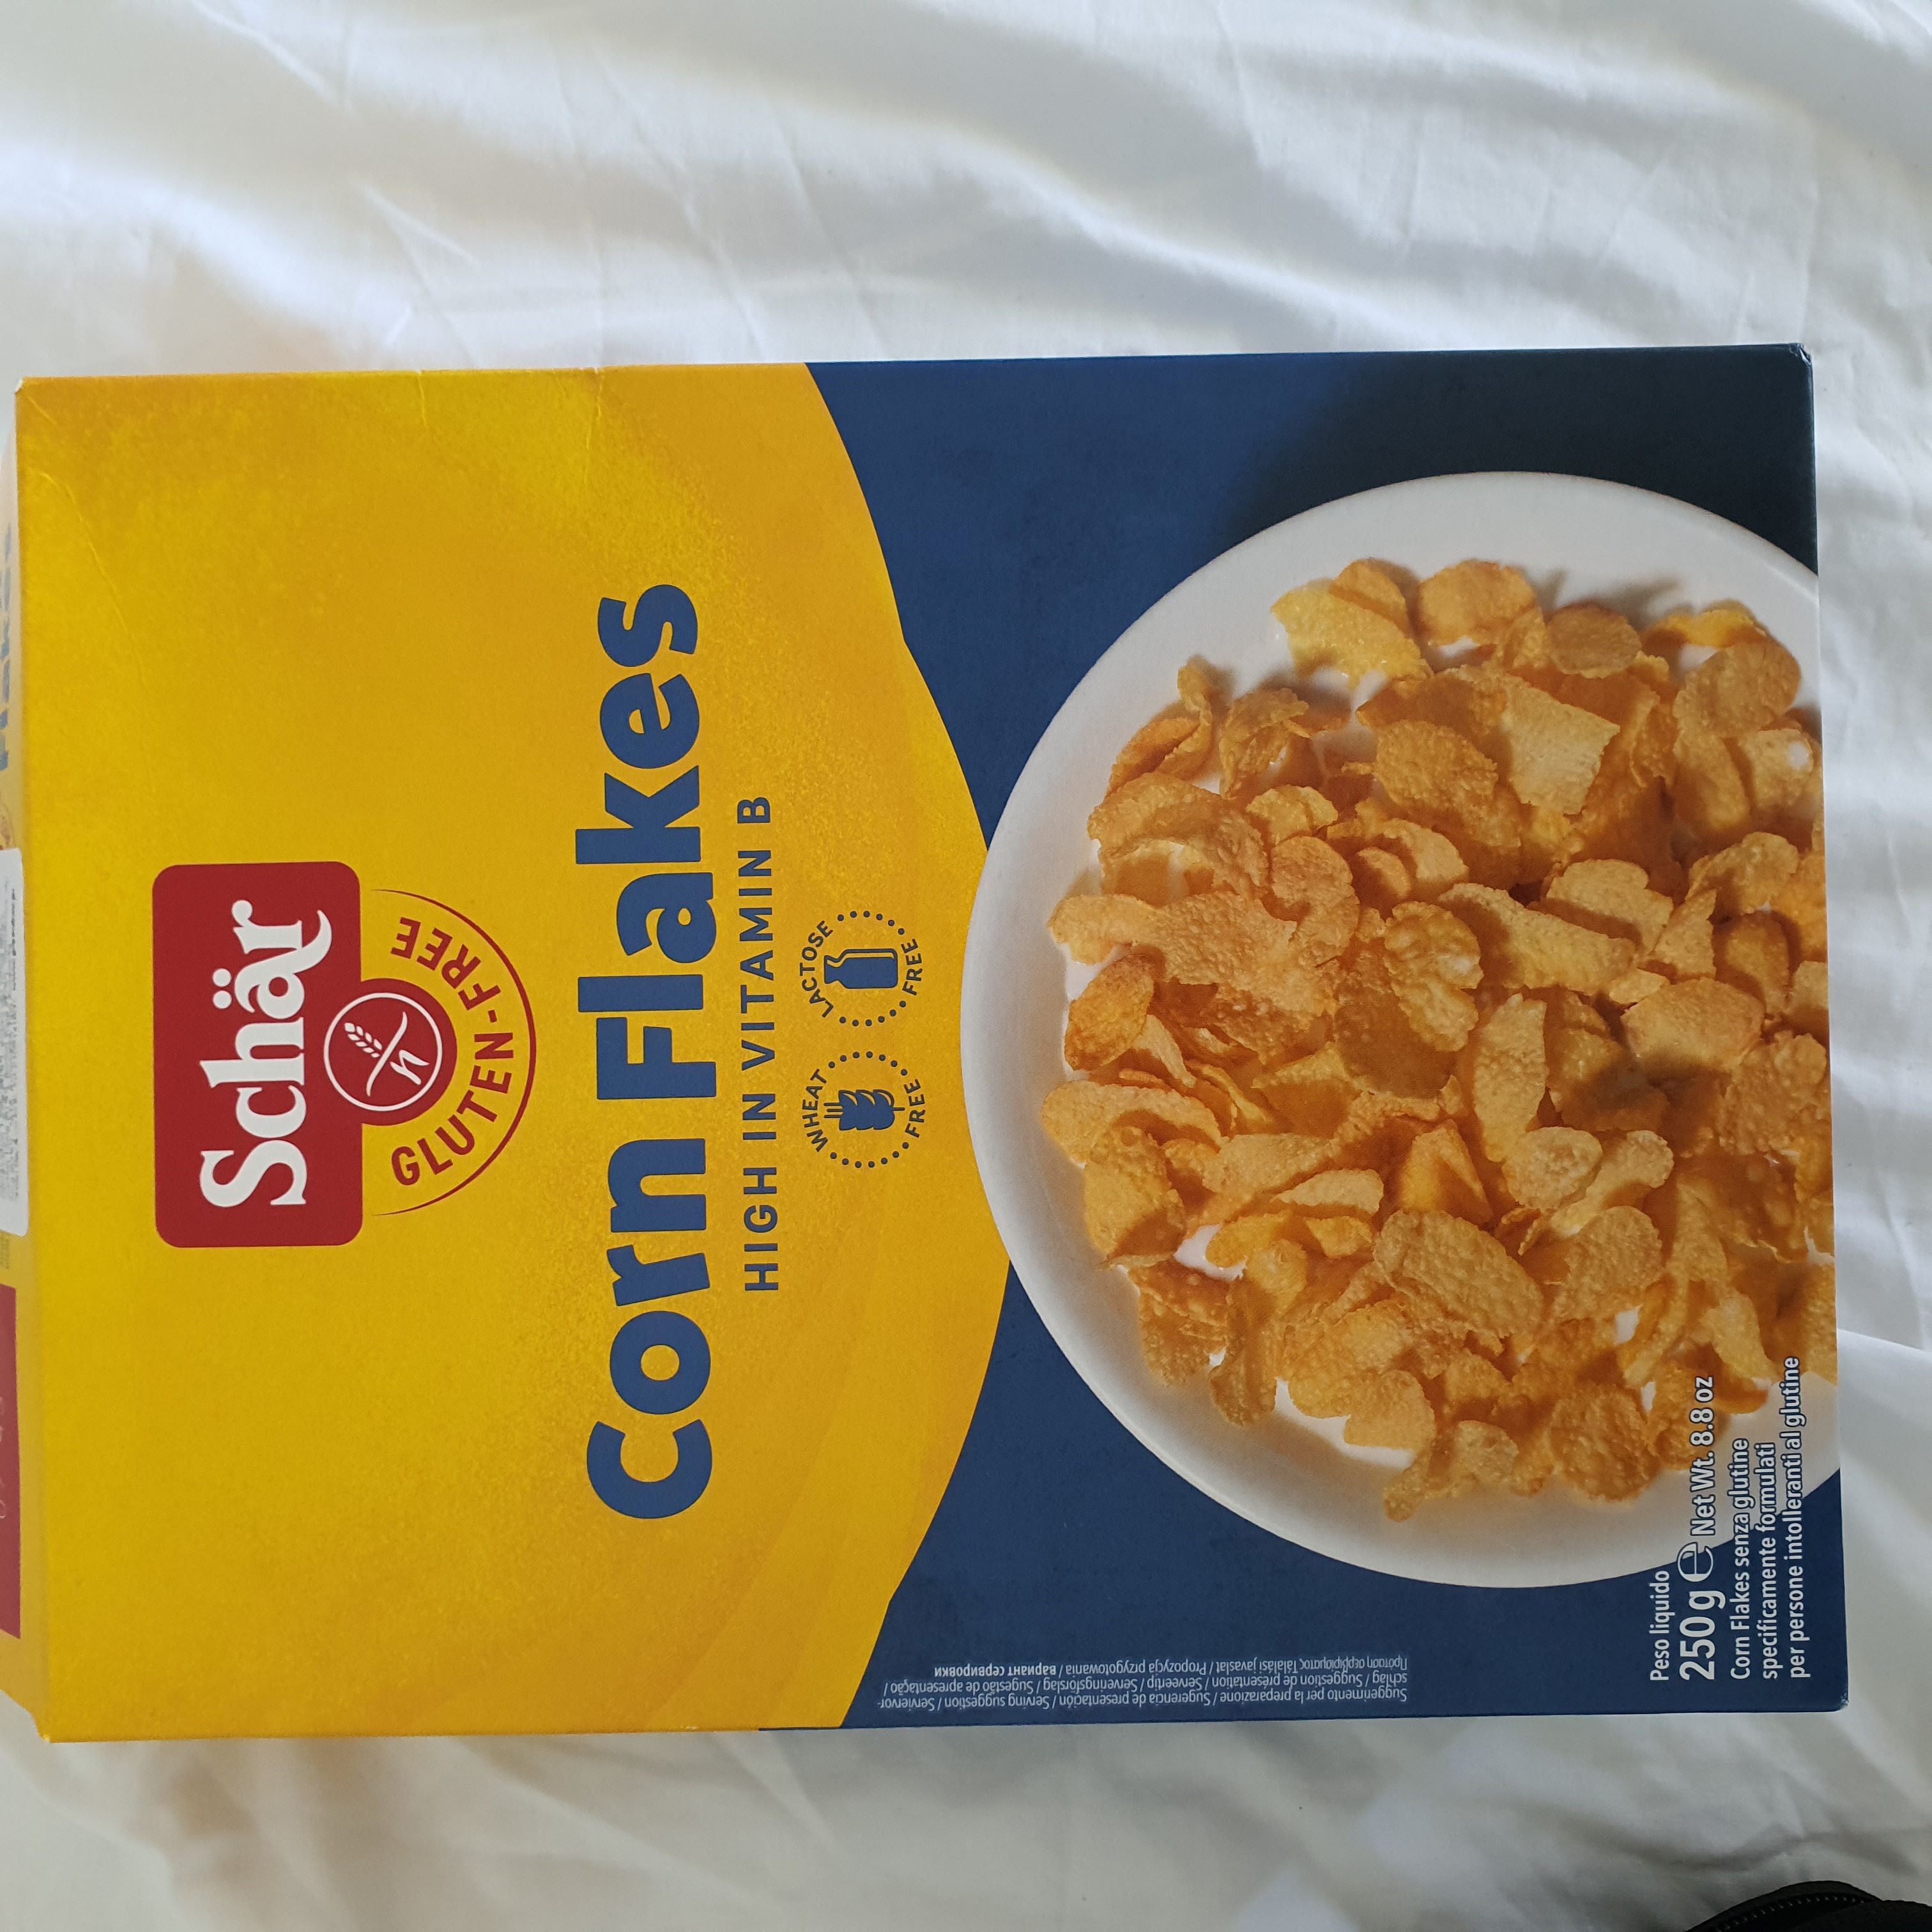 Gluten free cereal in Greece